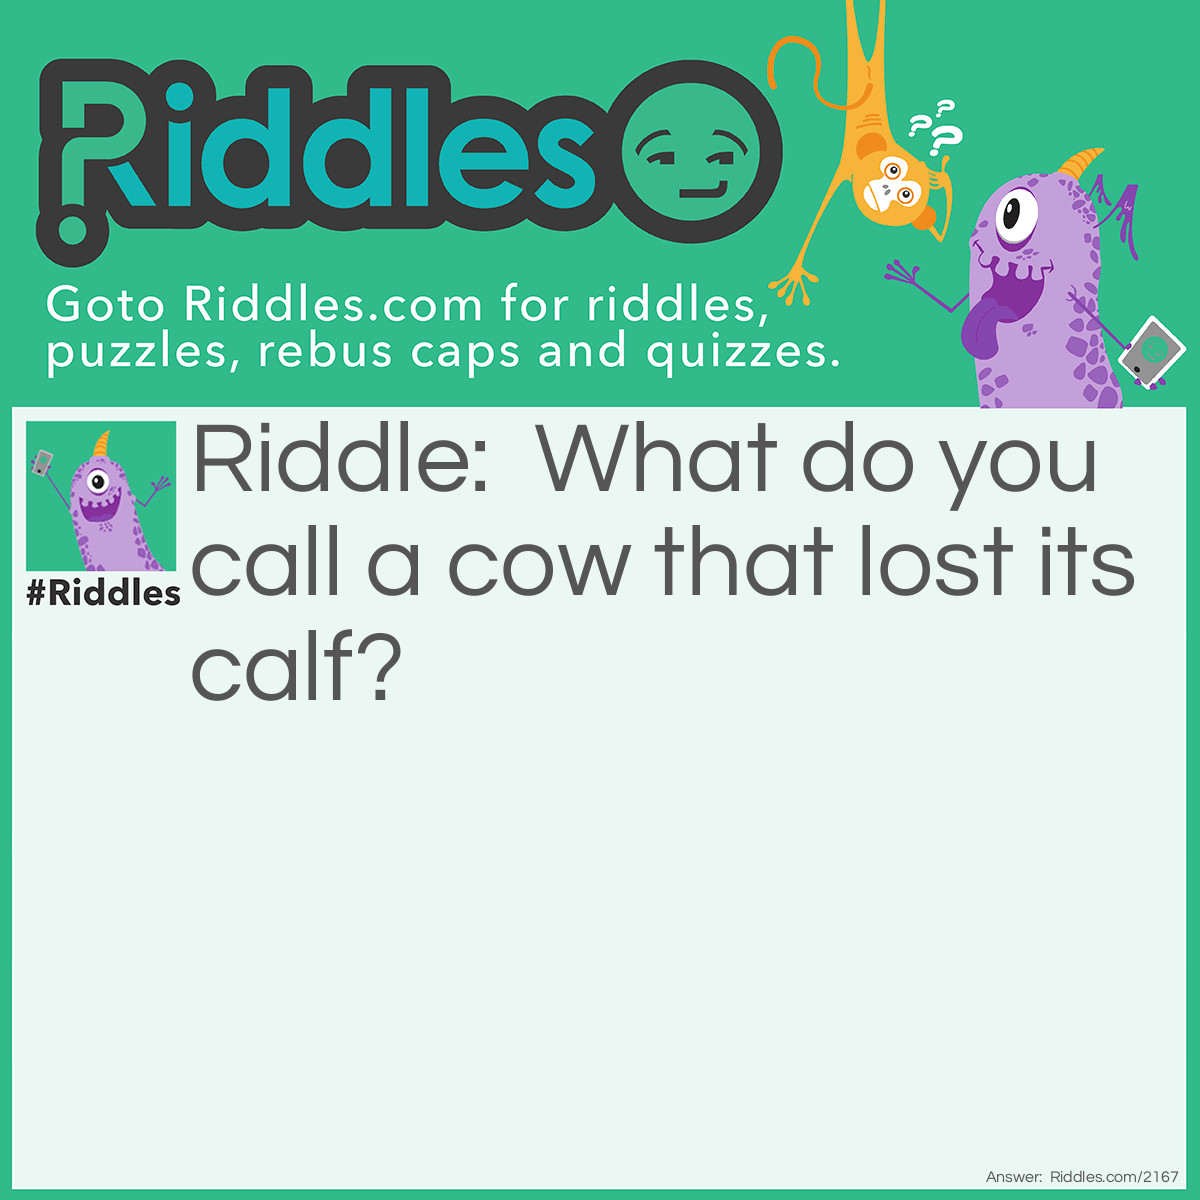 Riddle: What do you call a cow that lost its calf? Answer: De-calf-inated.